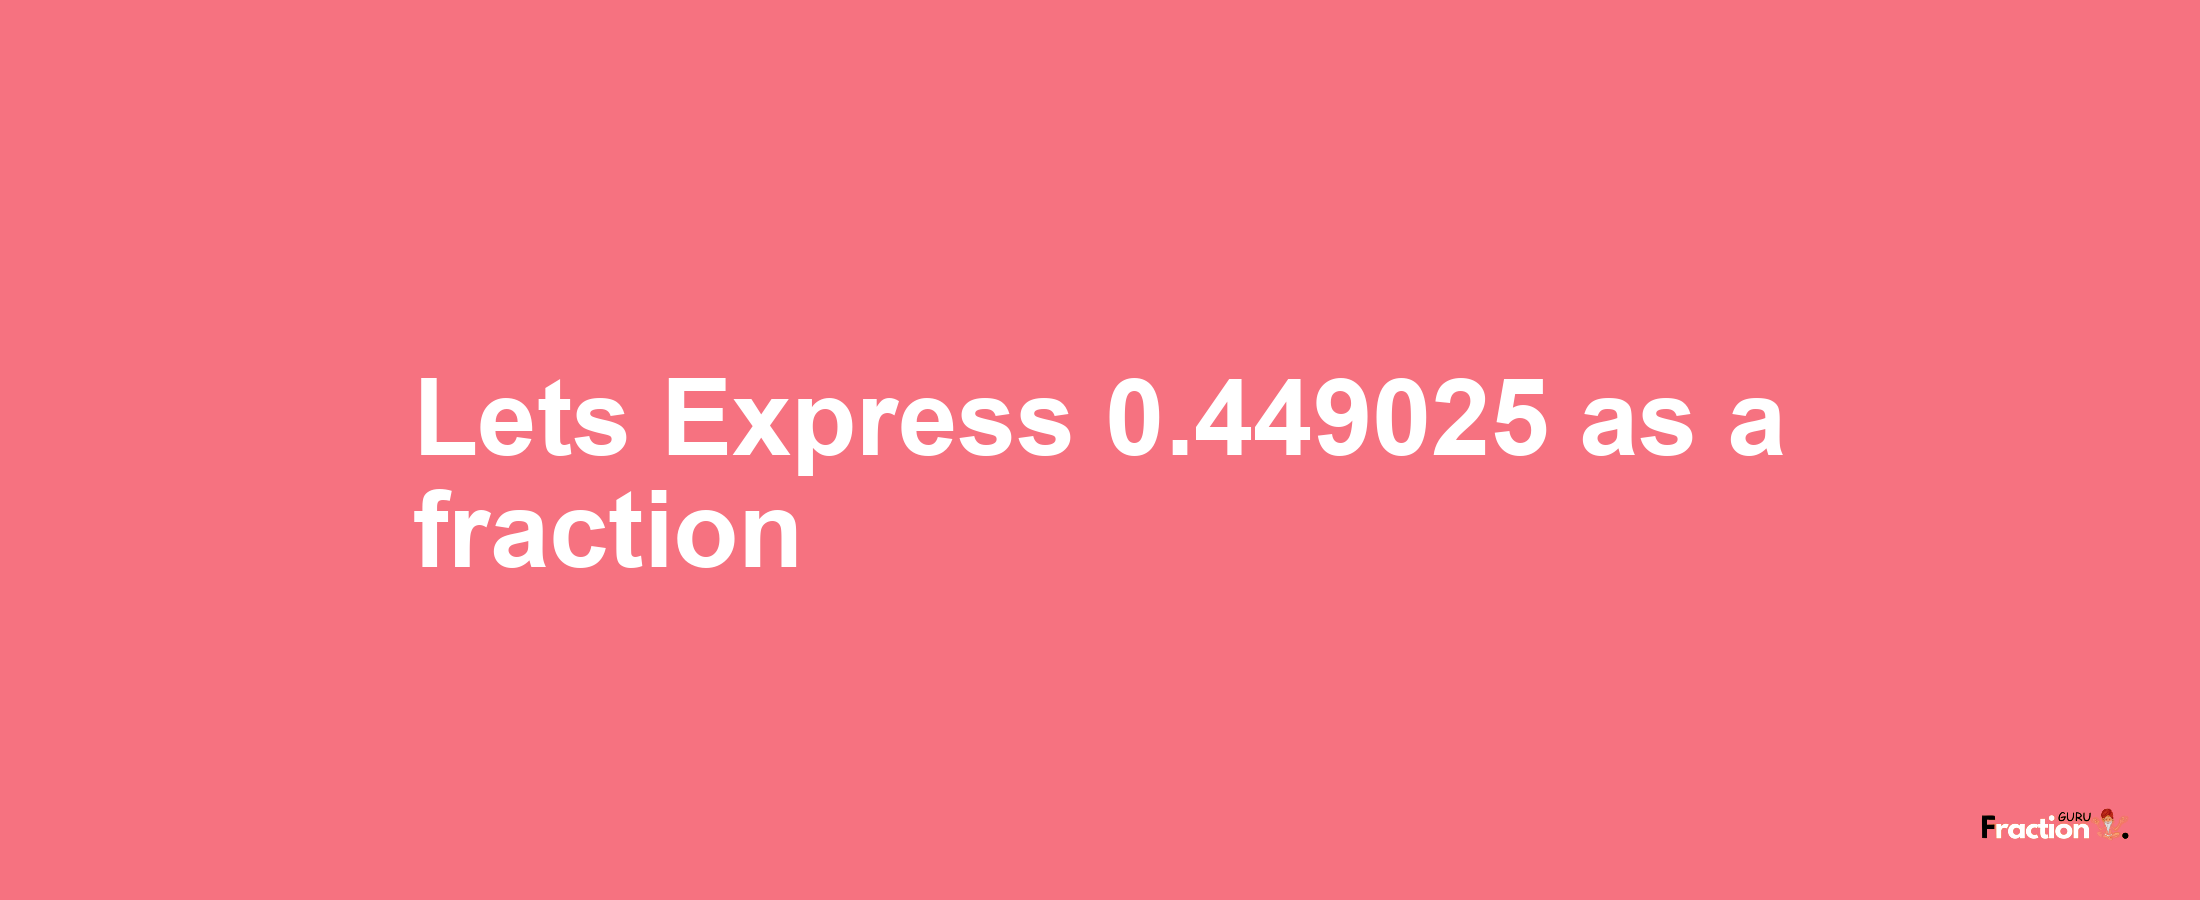 Lets Express 0.449025 as afraction